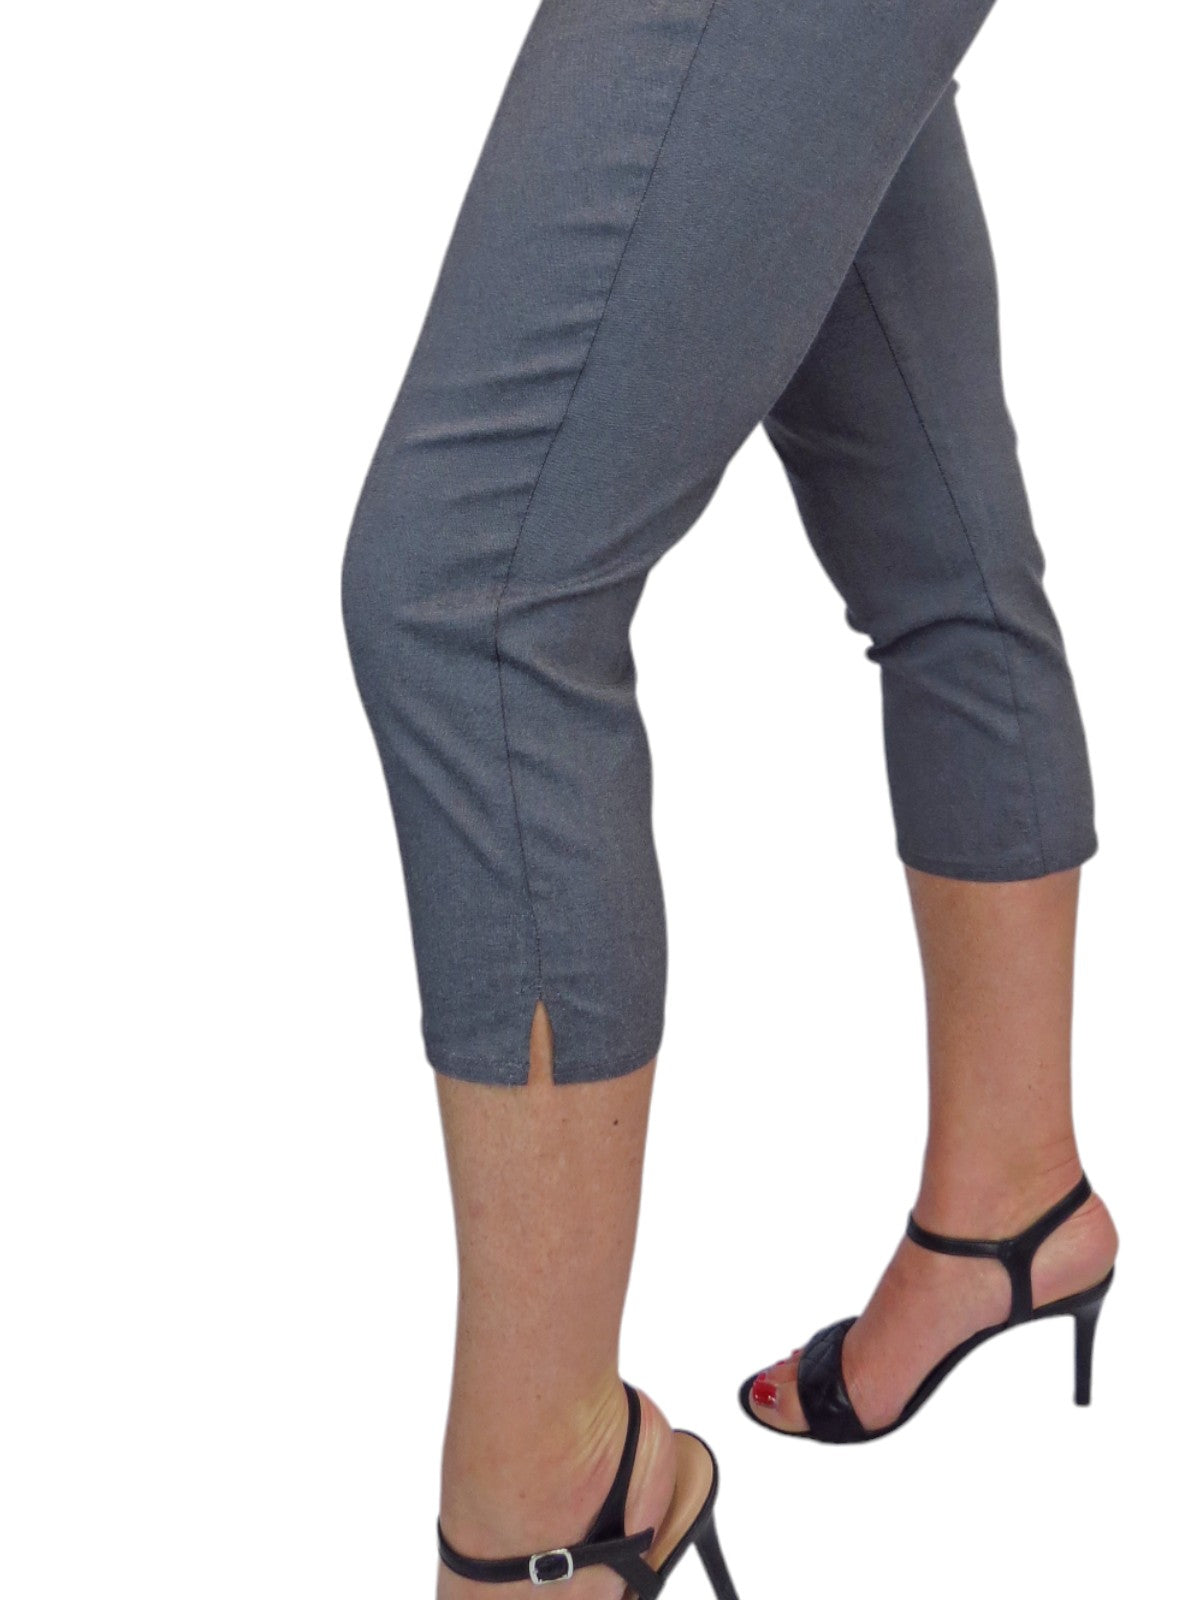 Women's Pull On Elasticated Waist Cropped Trousers Marl Grey